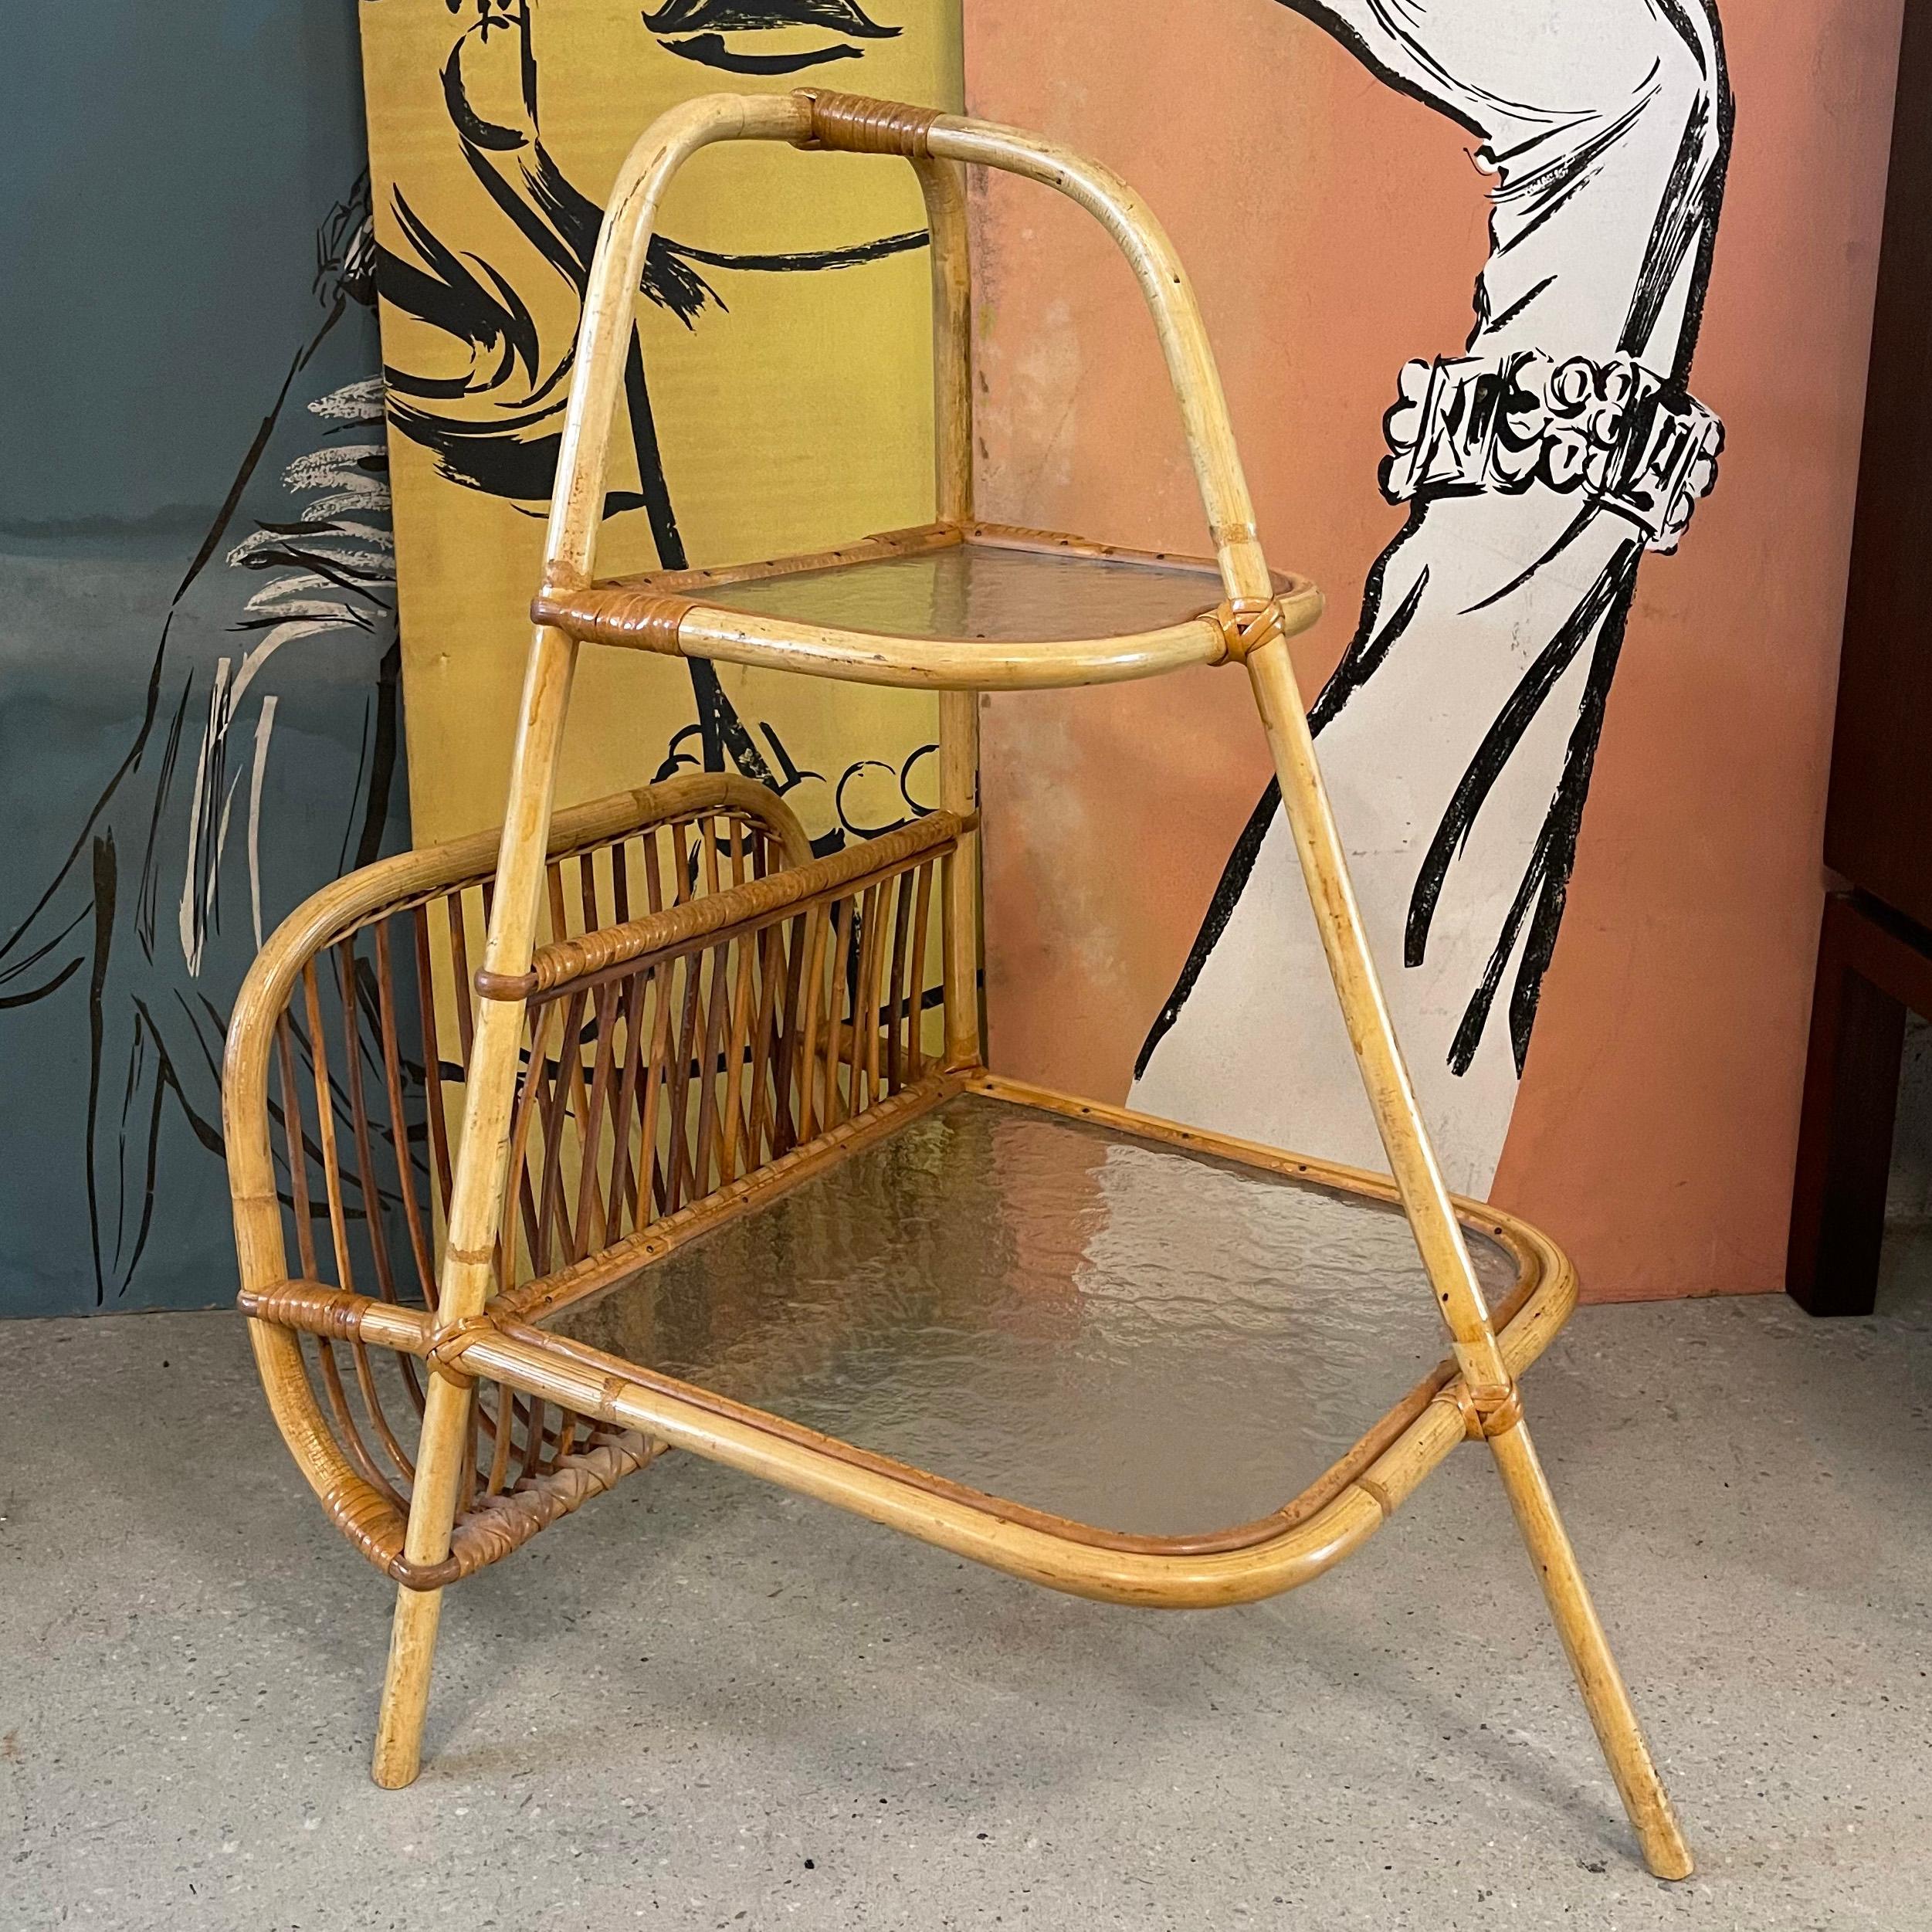 Mid-Century Modern, tiered side table with magazine holder features a rattan frame with textured glass shelves. The tiers are 7 inches ht and 20 inches height.